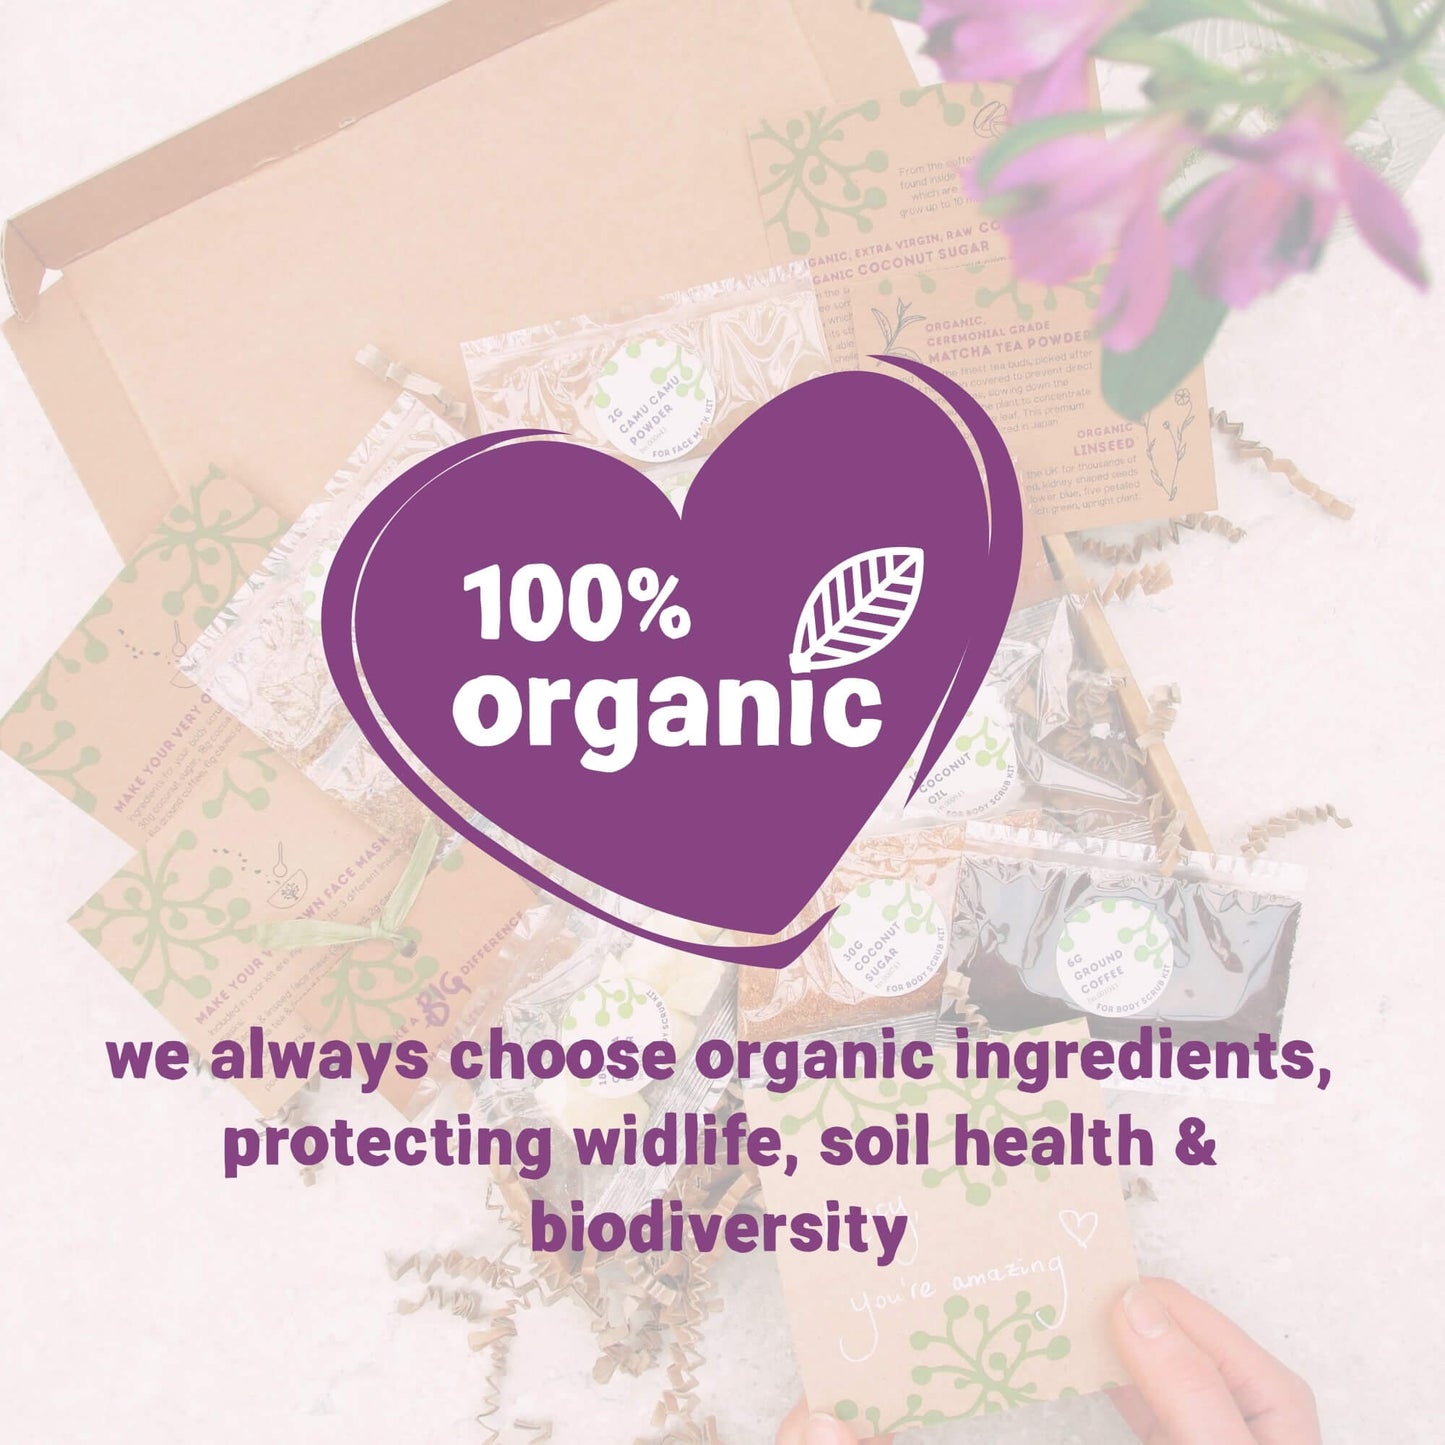 organic skincare to support environment inside birthday letterbox gift